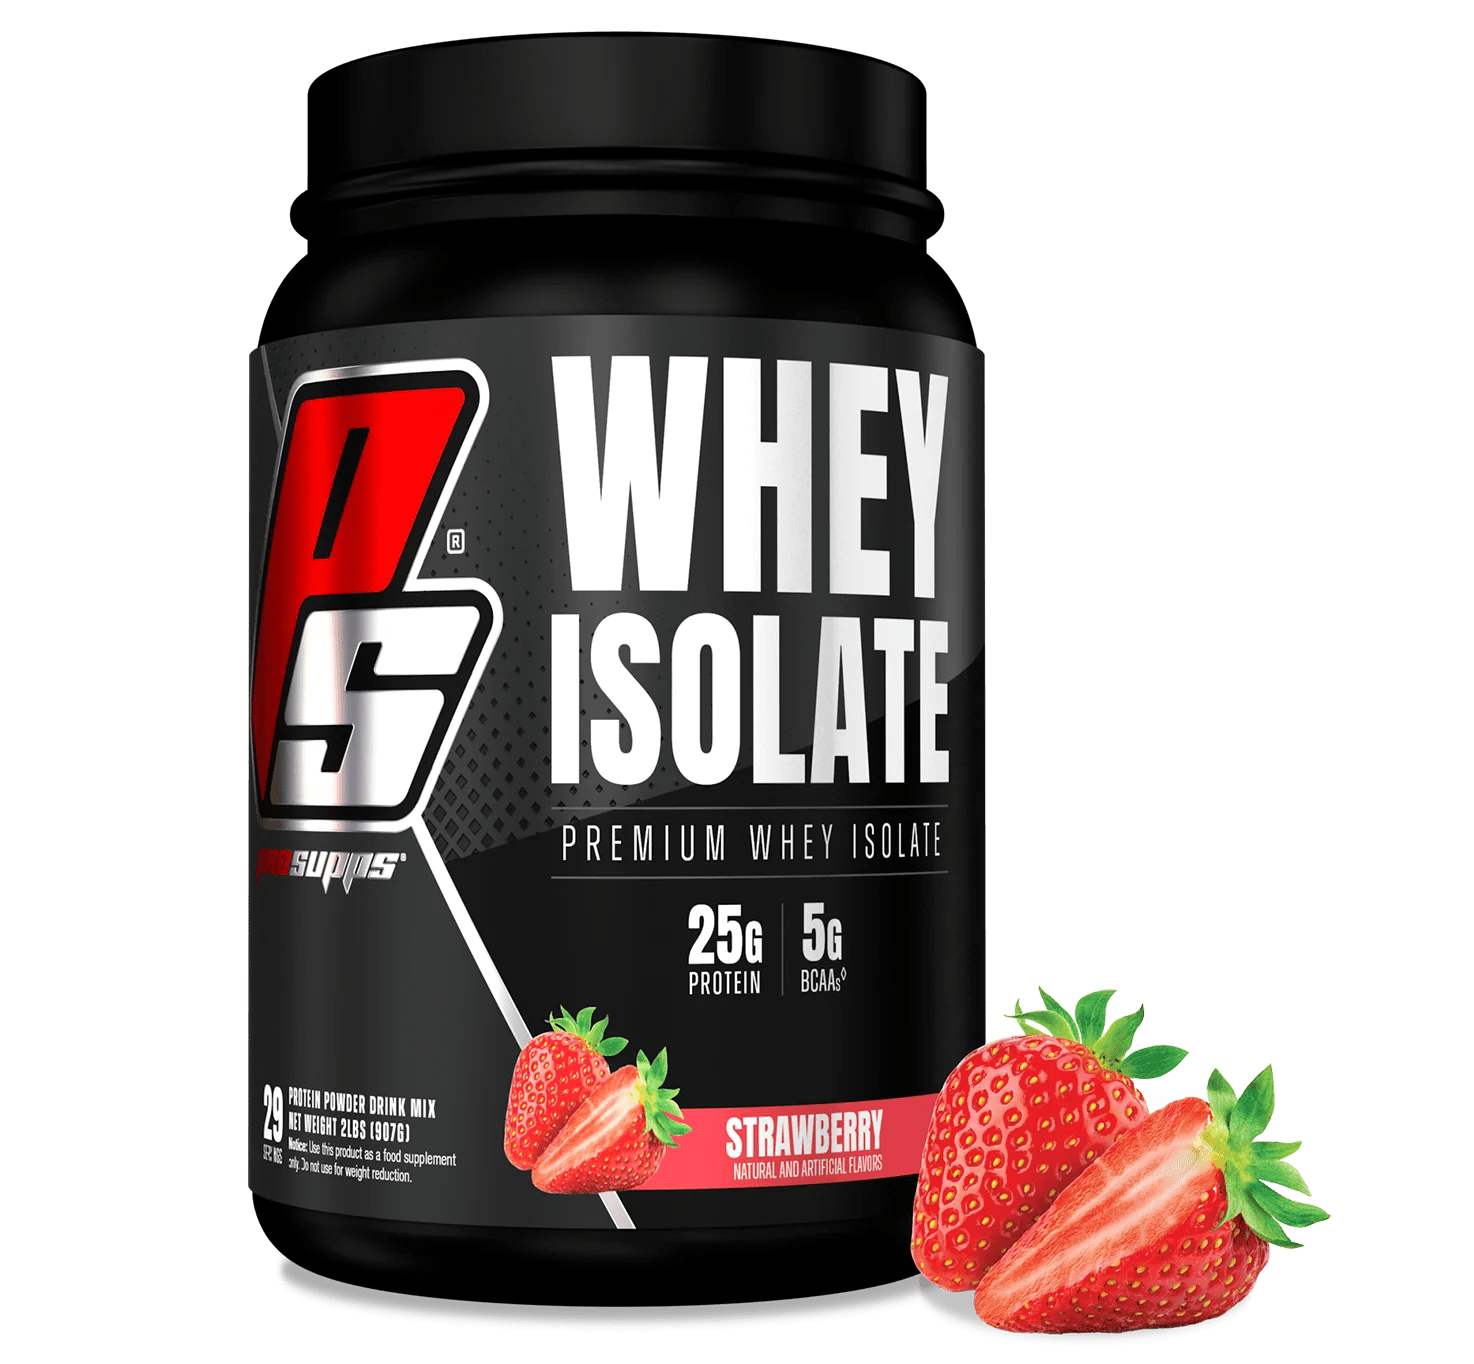 Prosupps Whey Isolate 2lb - Hypa Christchurch - Prosupps